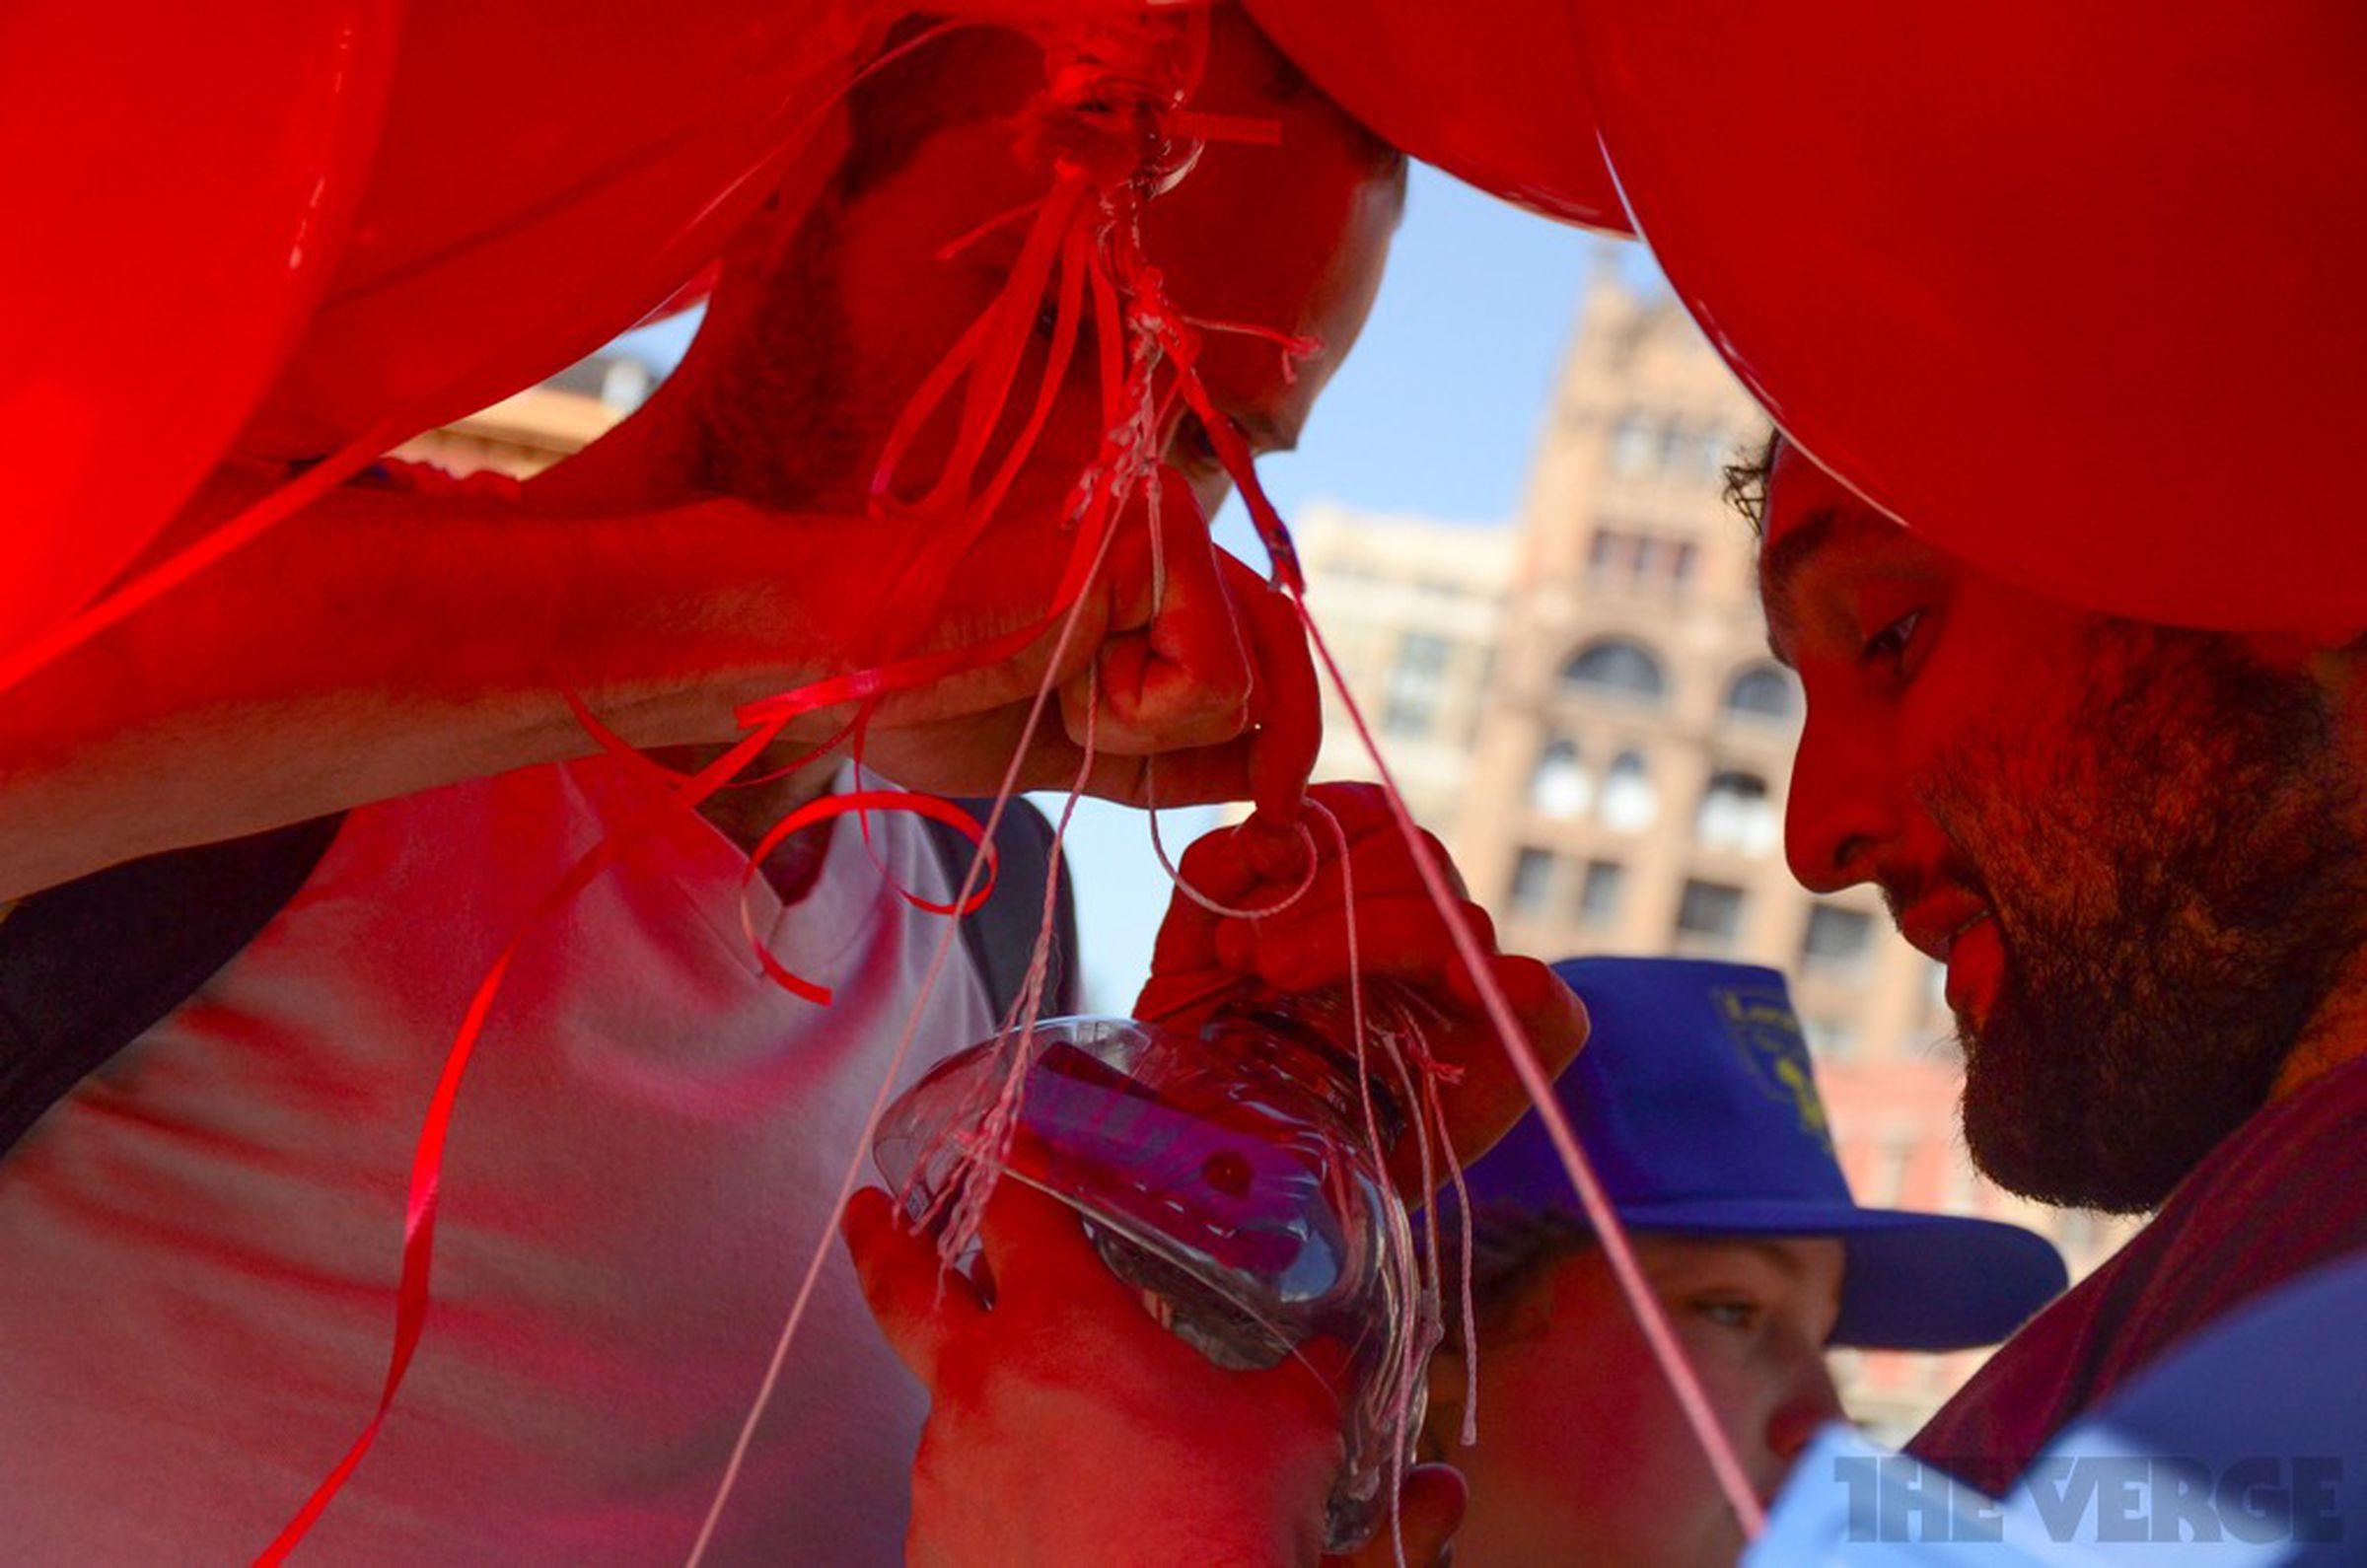 Occupy's DIY balloon cameras map the skies above NYC